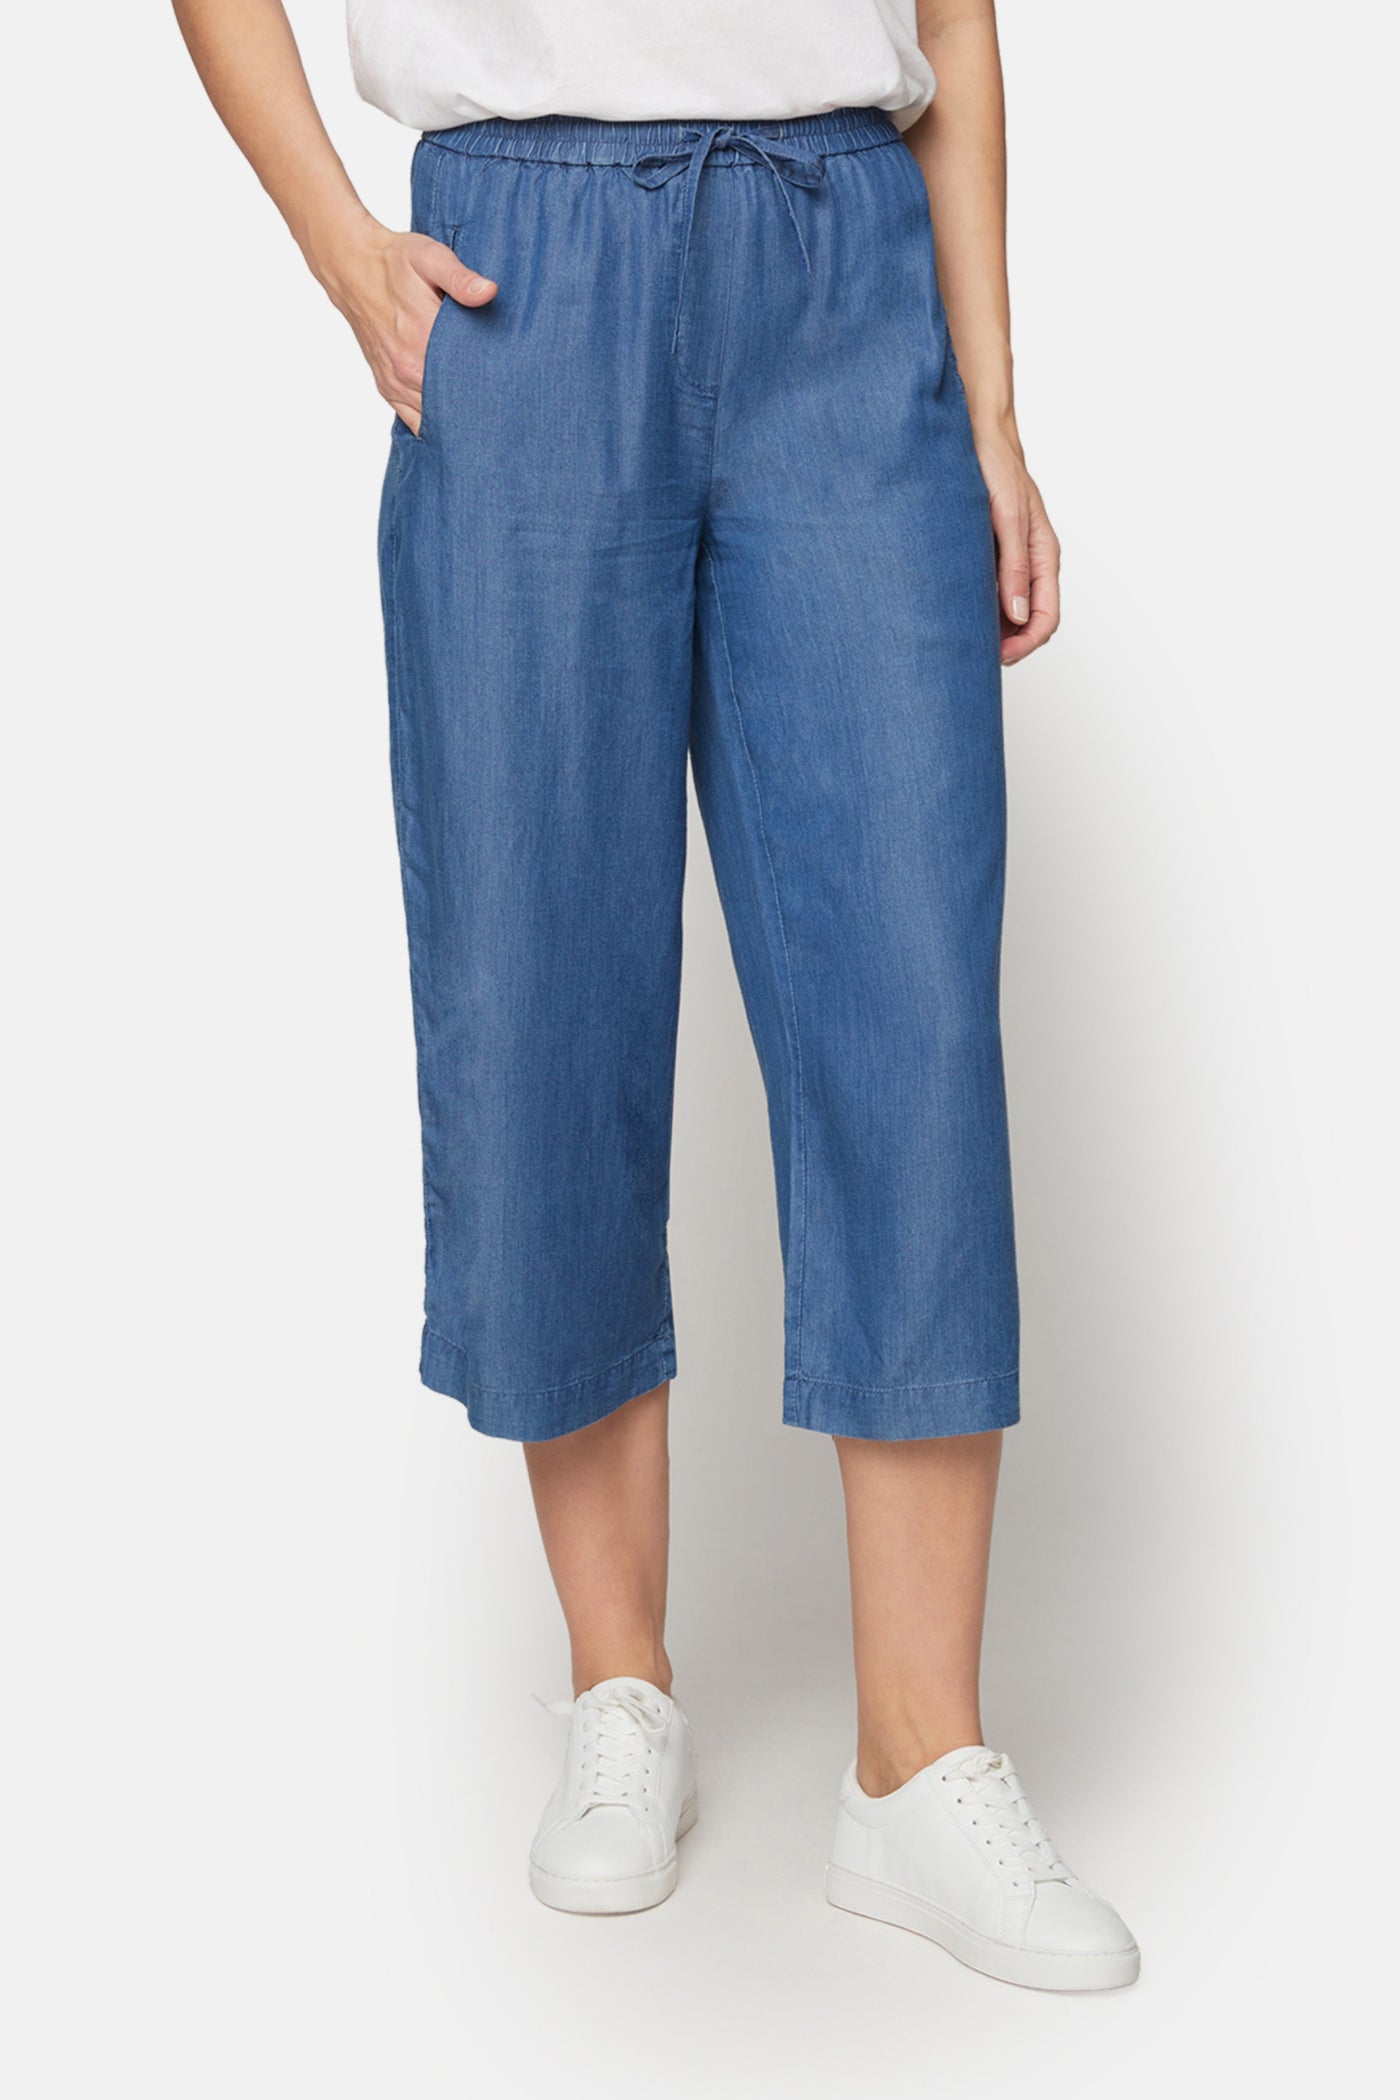 Tencell Blue Trousers